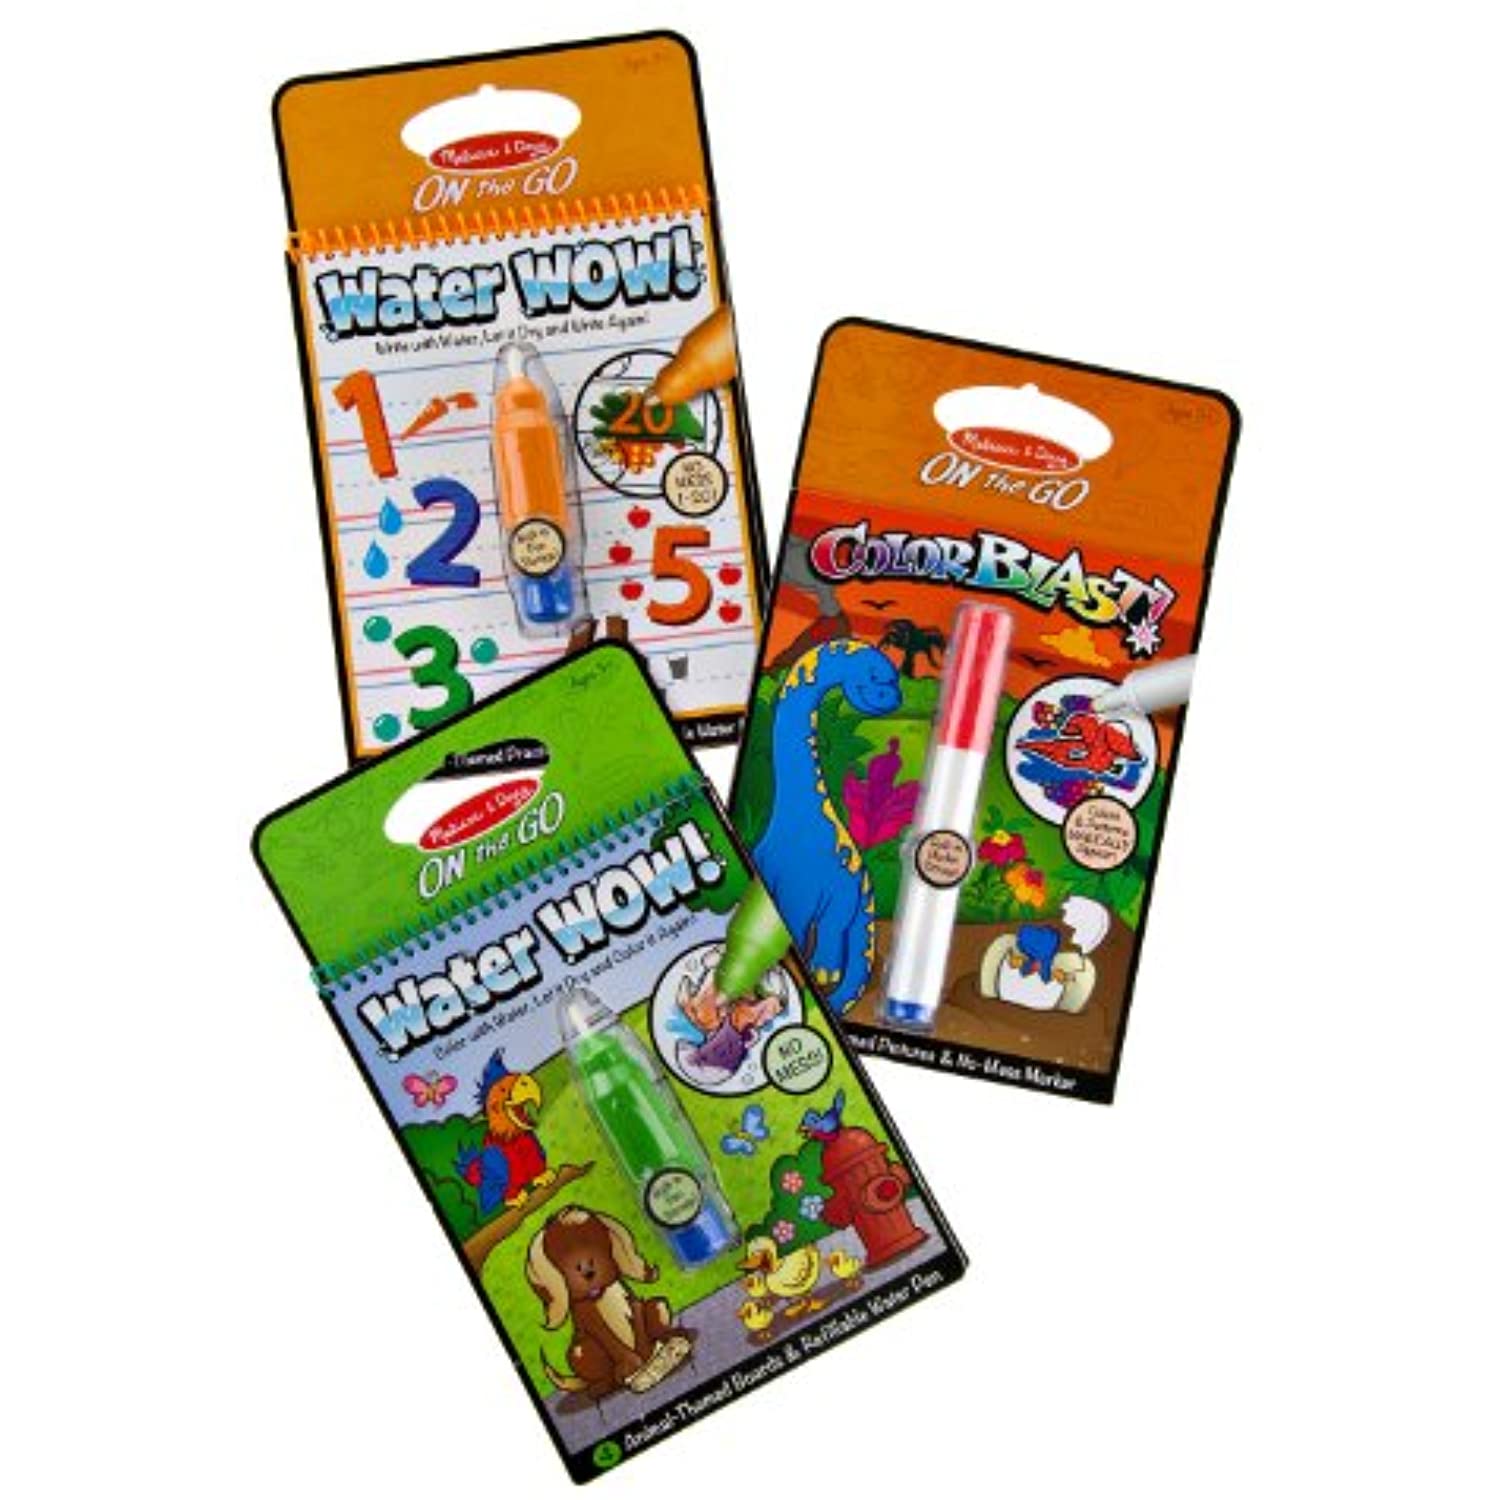 Melissa & Doug Colorblast Dinosaur, Water Wow Animals And Numbers - Bundle Pack